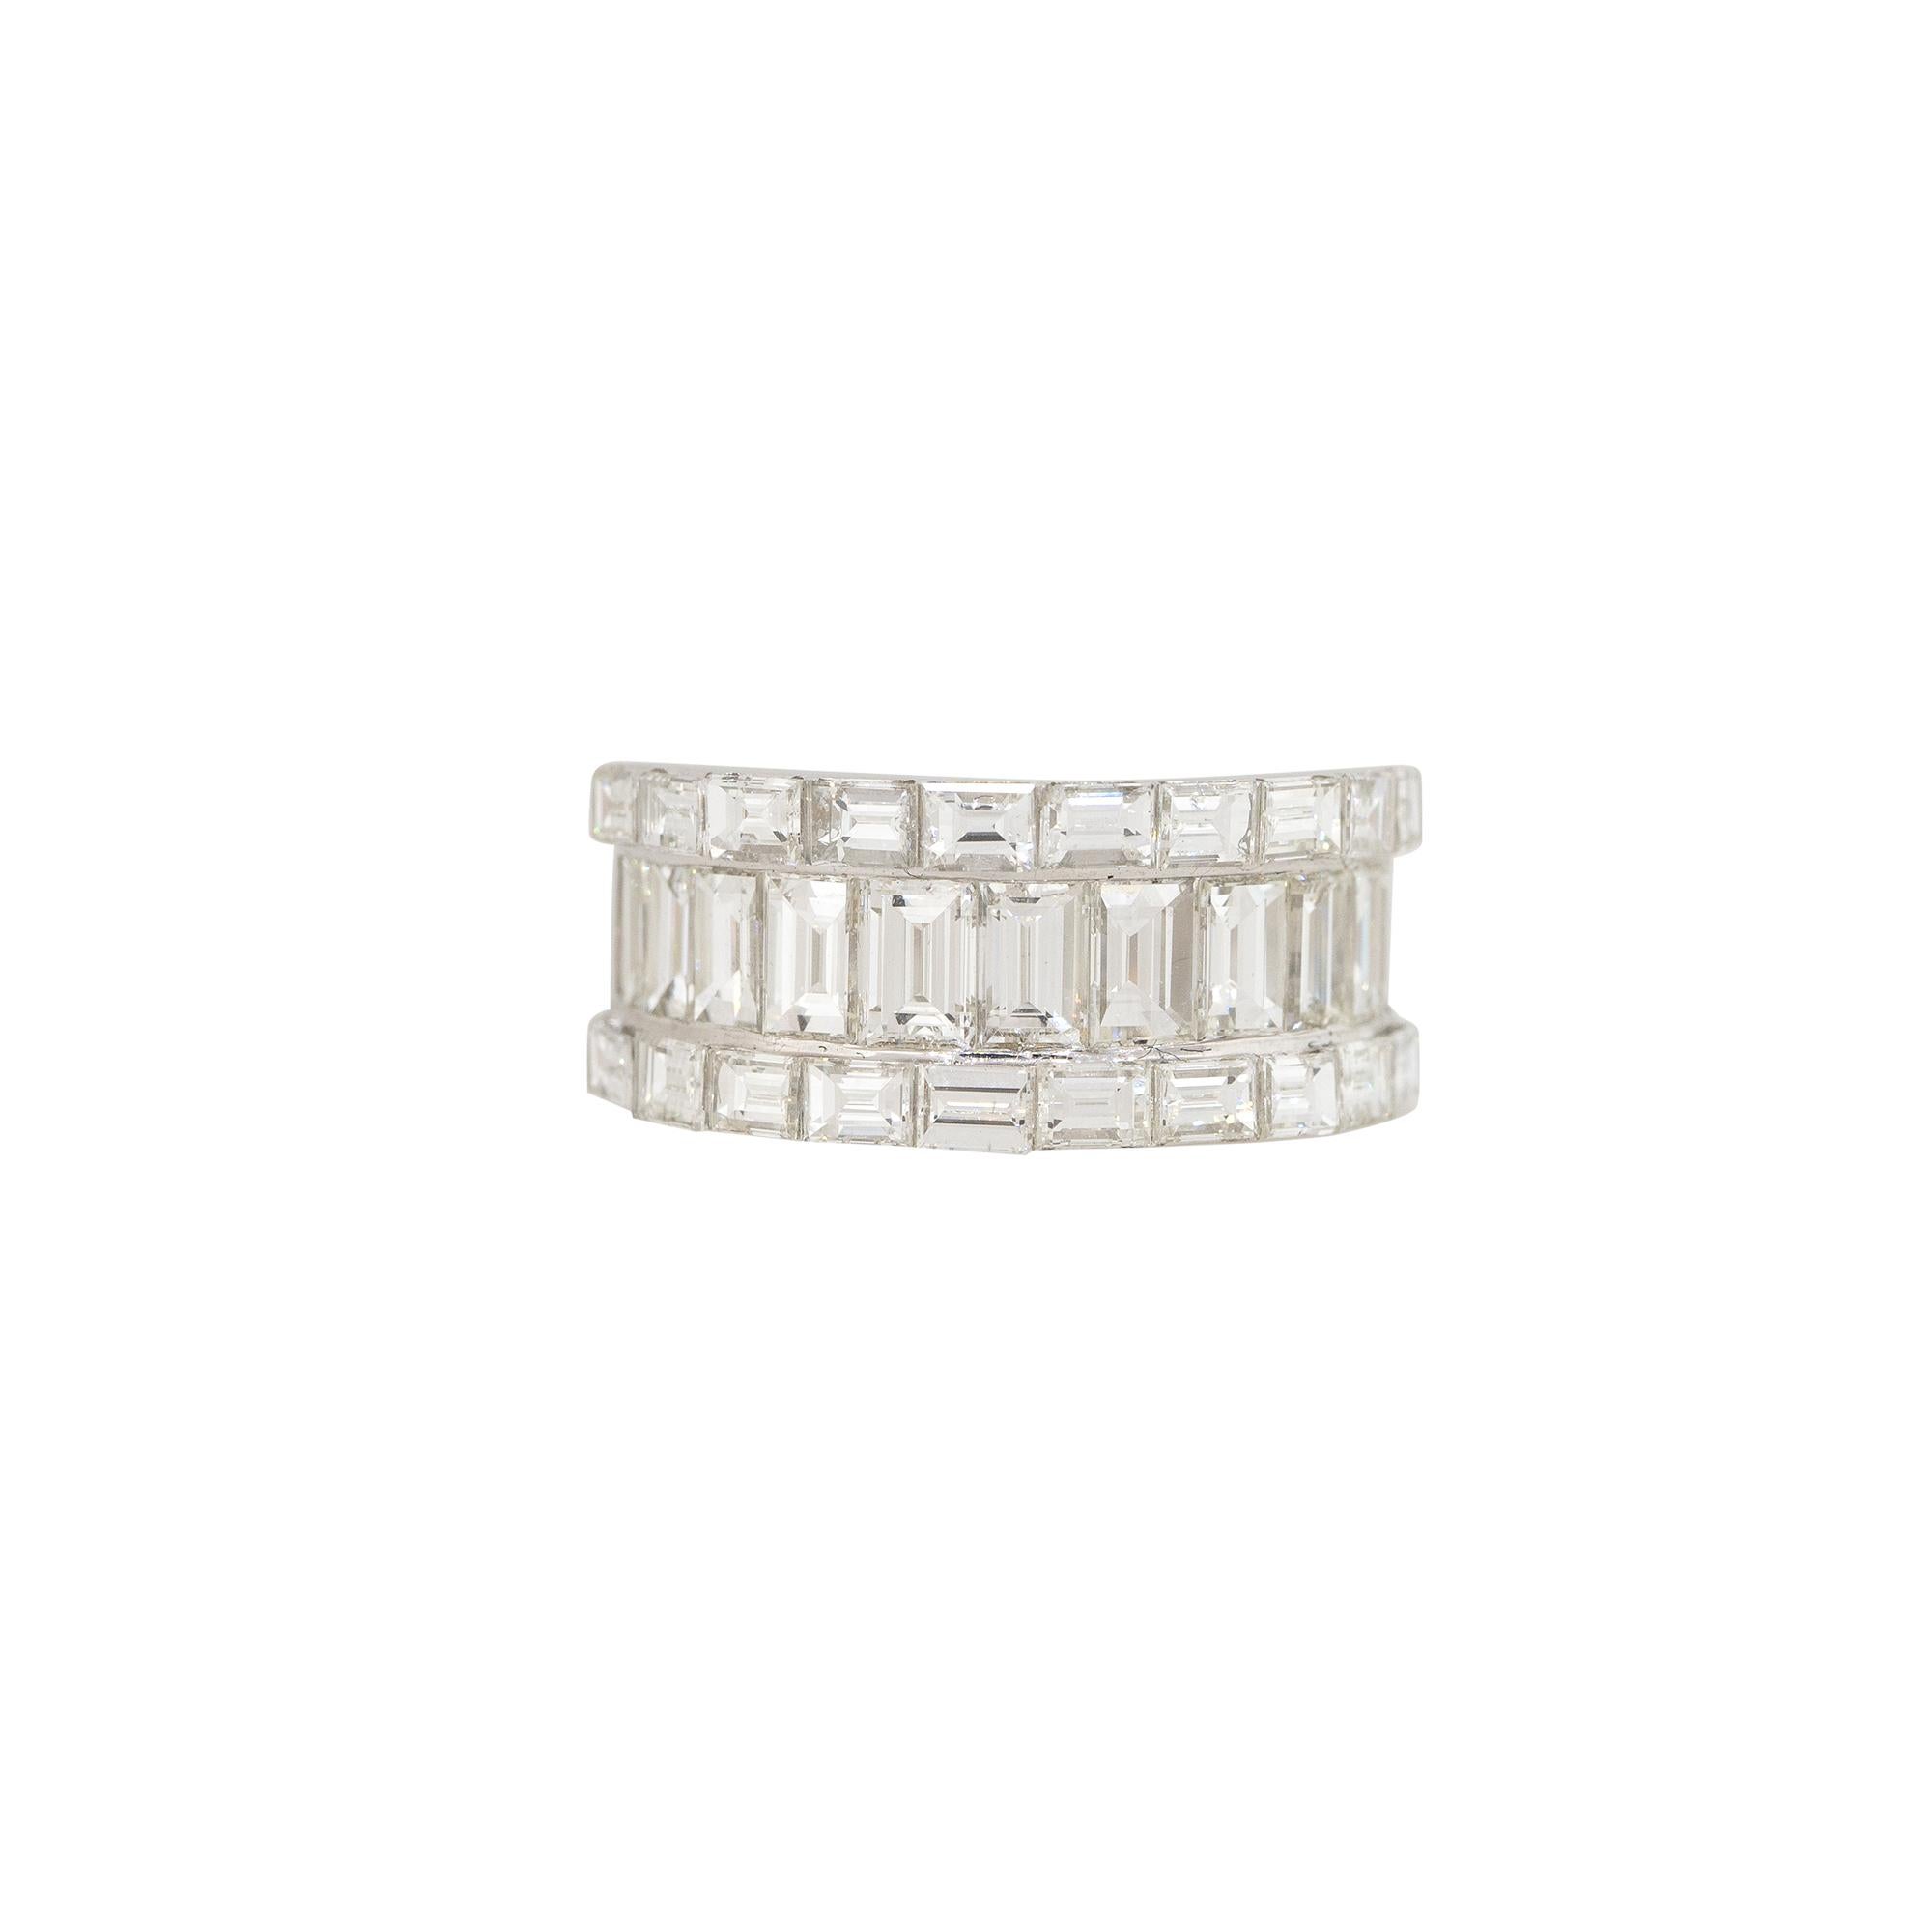 18k White Gold 4.33ctw Baguette Cut Diamond 3-Row Wide Ring

Product: Wide 3-Row Diamond Band
Material: 18k White Gold
Diamond Details: There are approximately 4.33 carats of Baguette cut diamonds. Diamonds in the center row are elongated